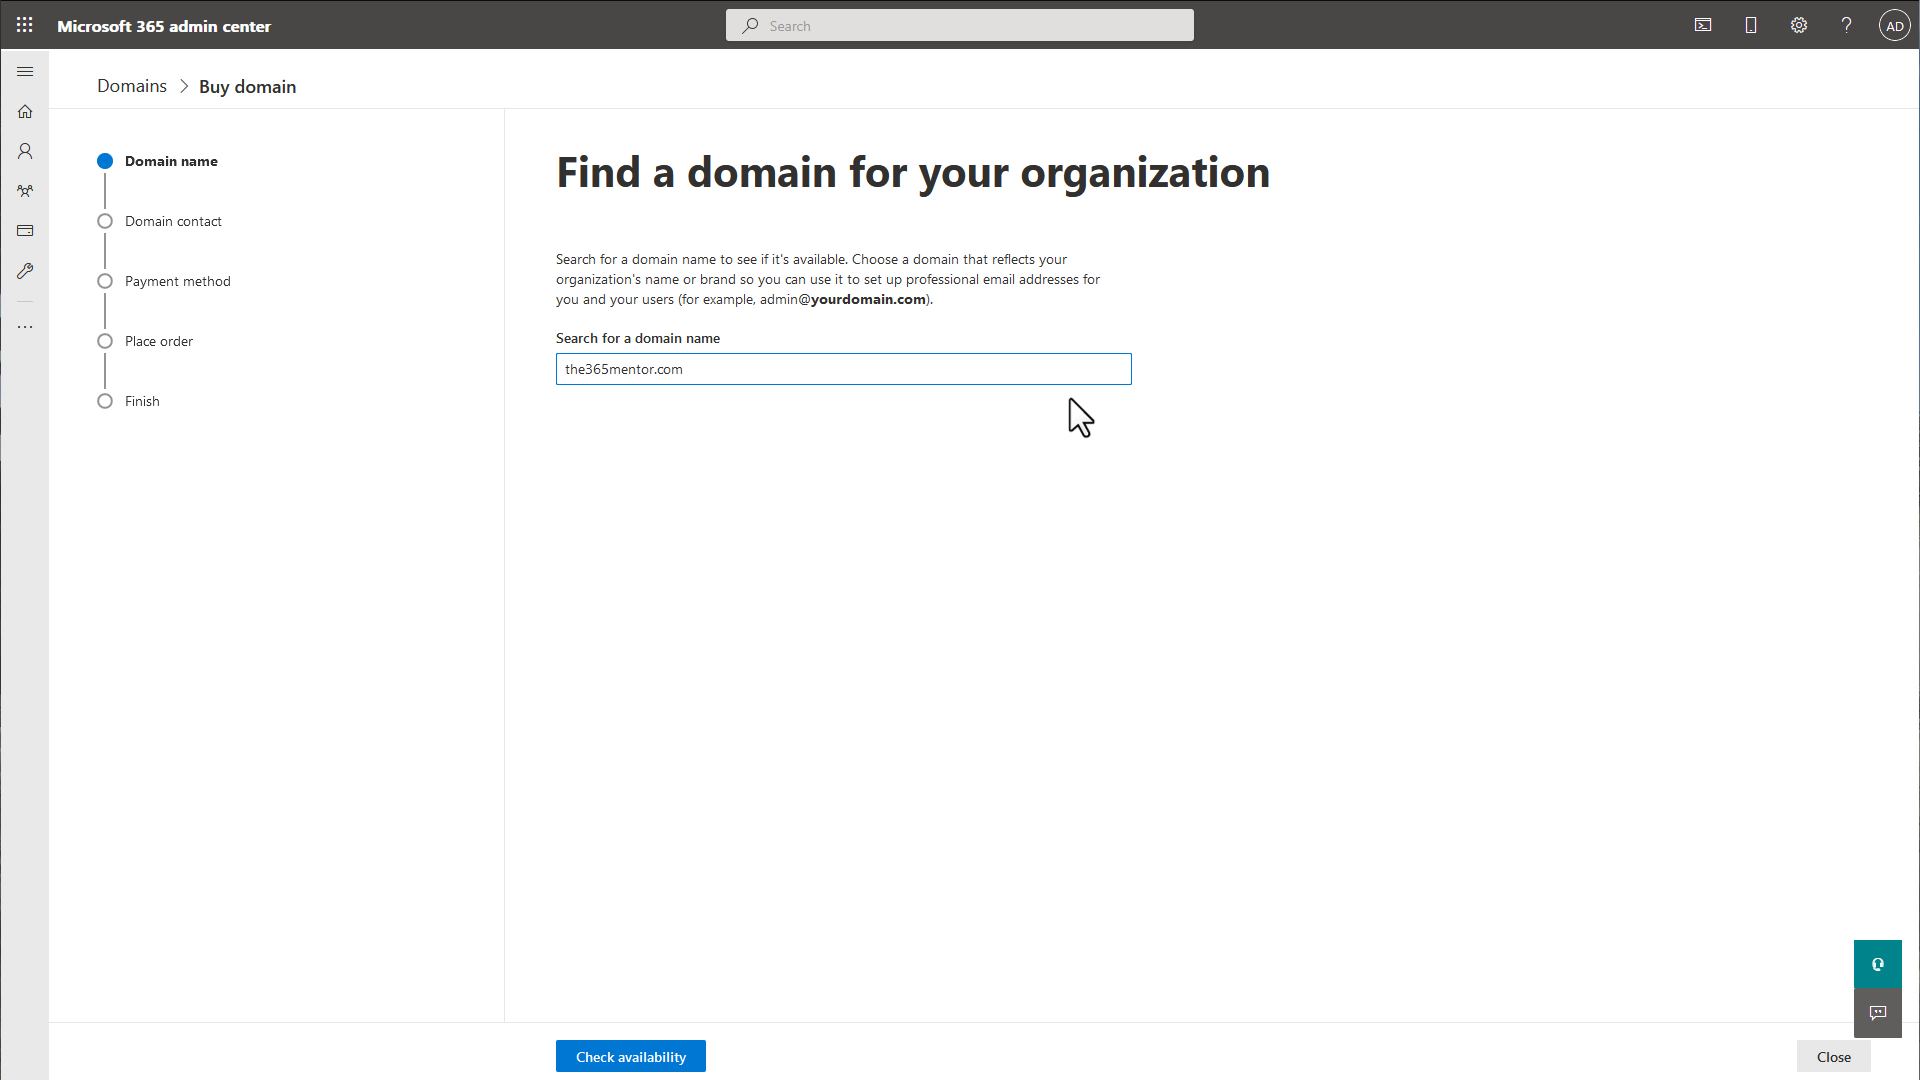 Buying a domain with Microsoft 365 - Domain